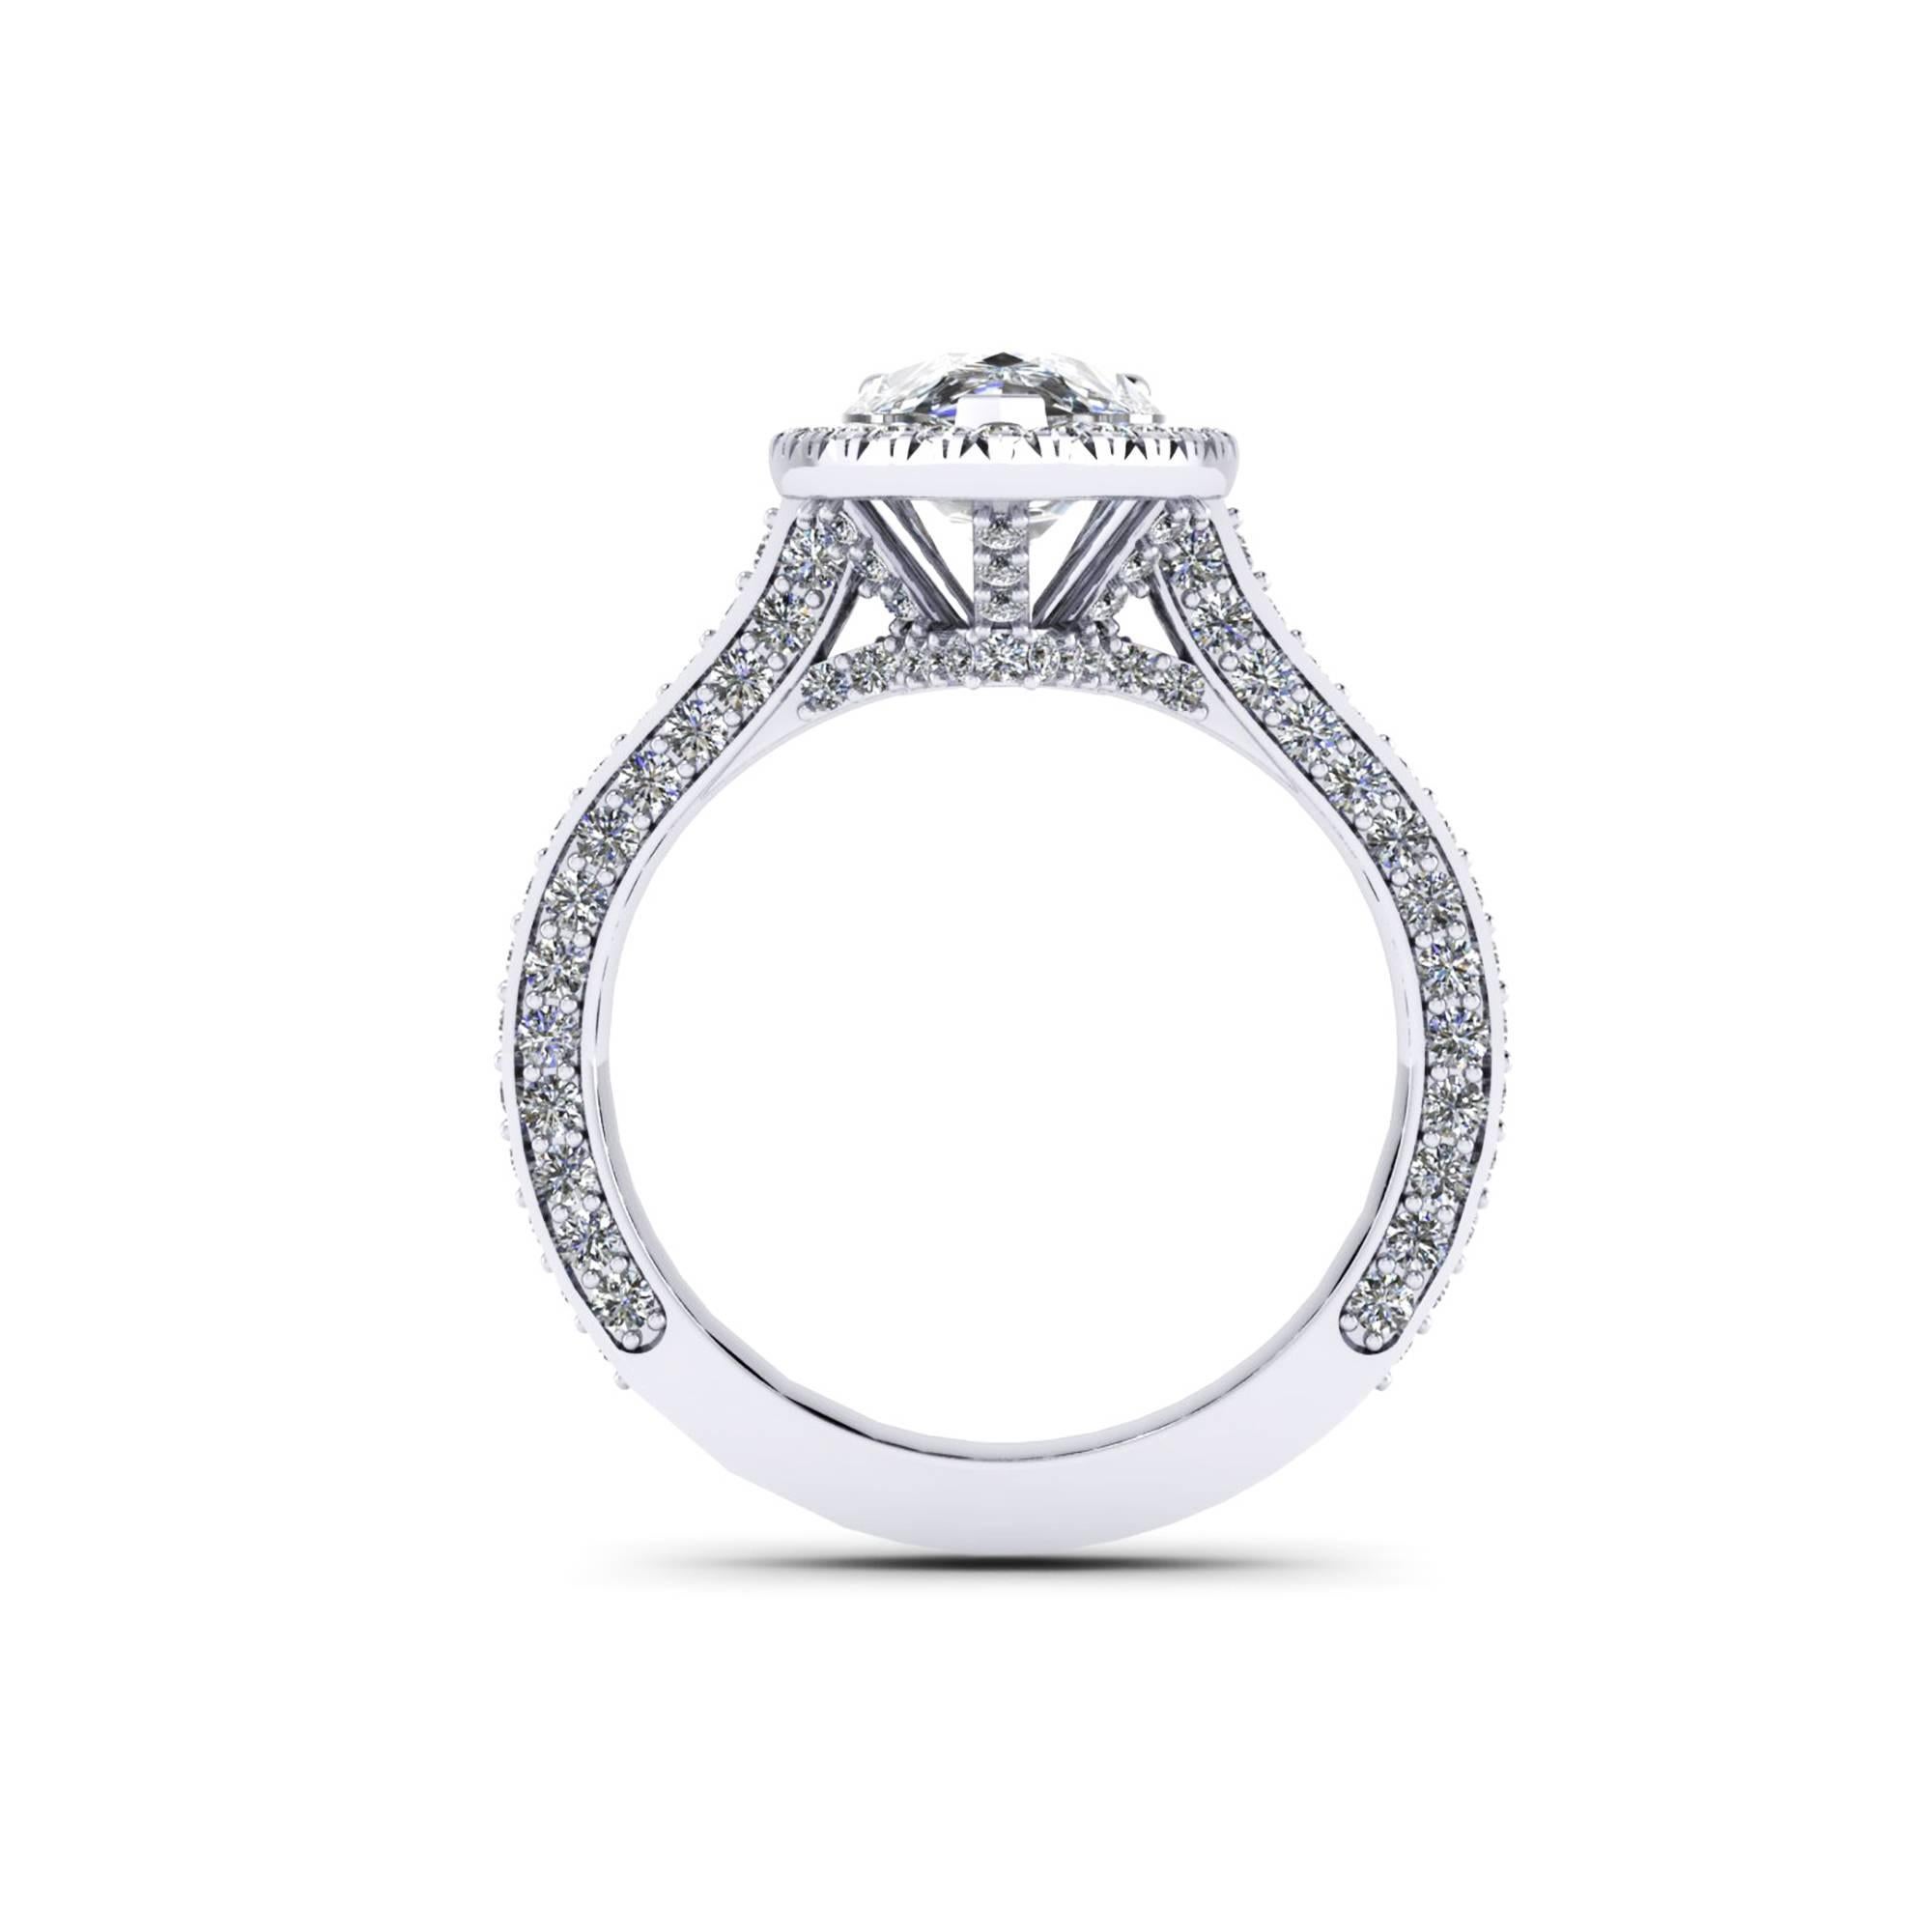 Ferrucci GIA Certified 1.90 carat D Color, Flawless clarity, Pear Shape Diamond engagement ring, Triple Excellent diamond, unique and rare pear shape, the purest Flawless Clarity and Best Color Diamond in nature.

This engagement ring is hand made